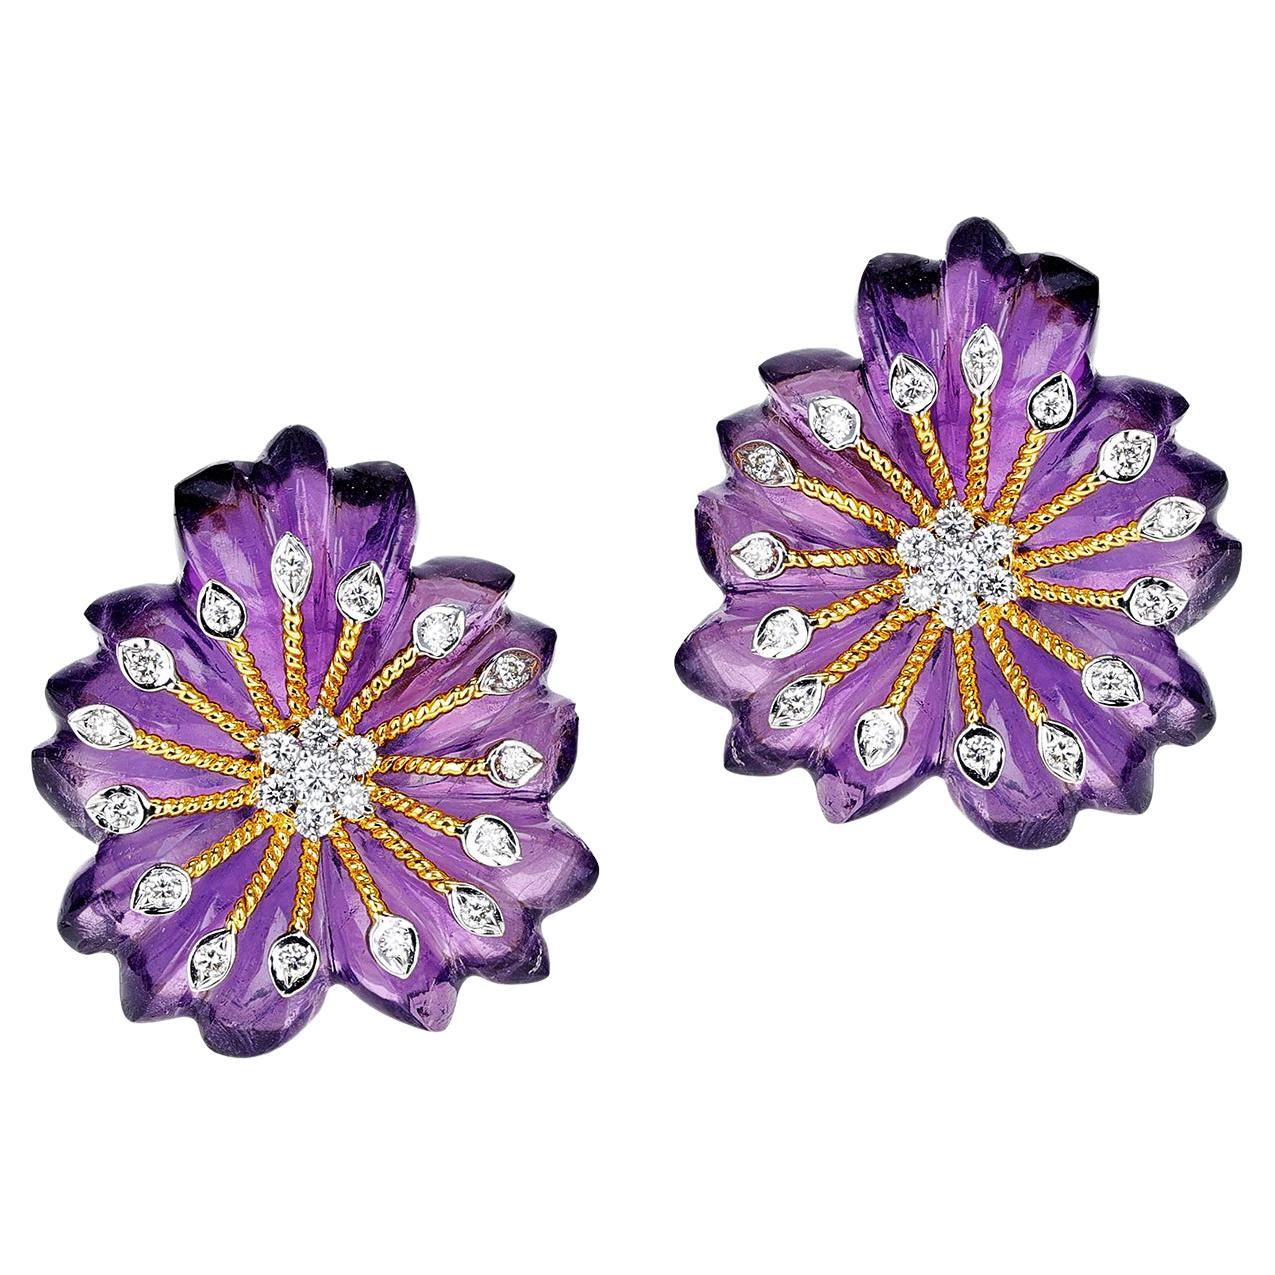 Carved Floral Amethyst Earrings with Diamonds, 14K